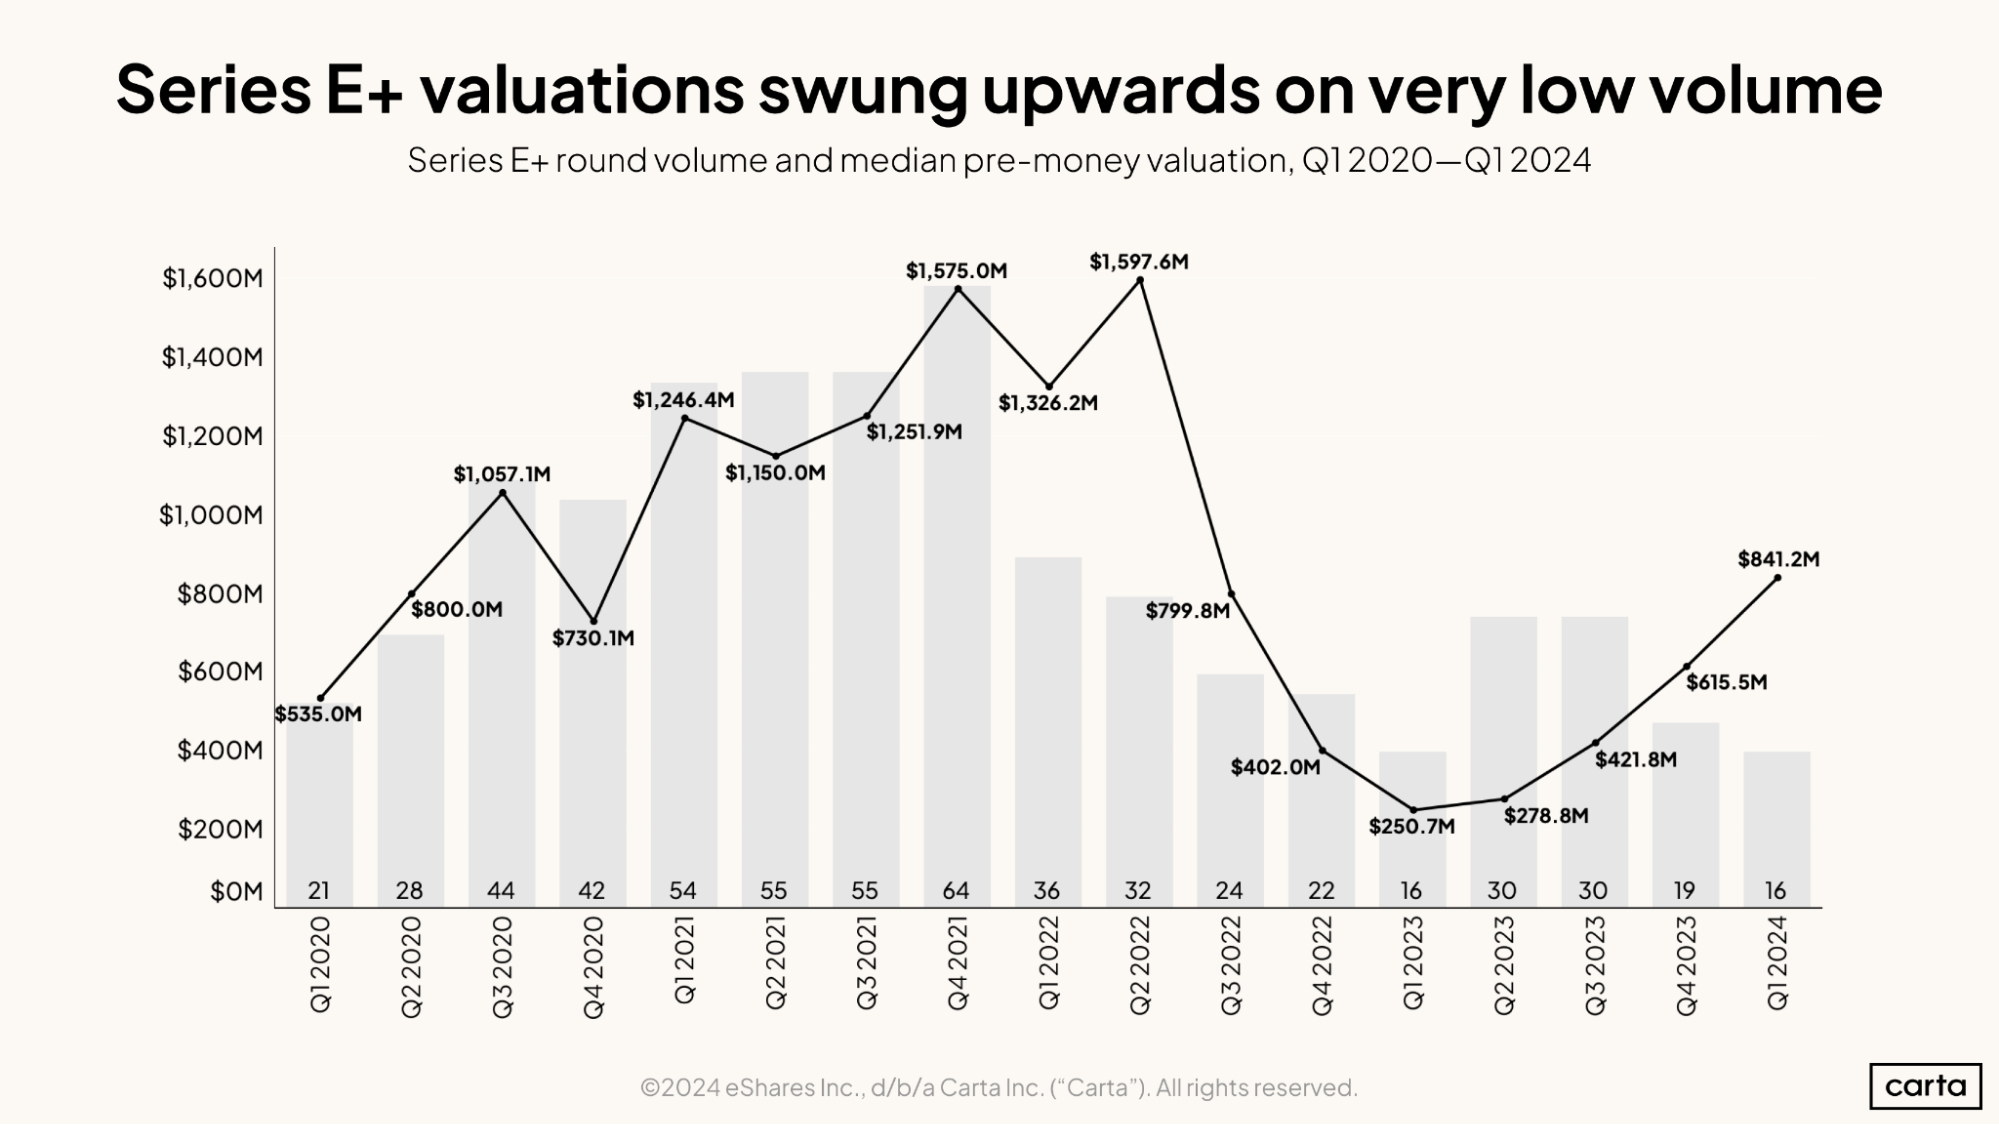 Series E+ valuations swung upwards on very low volume